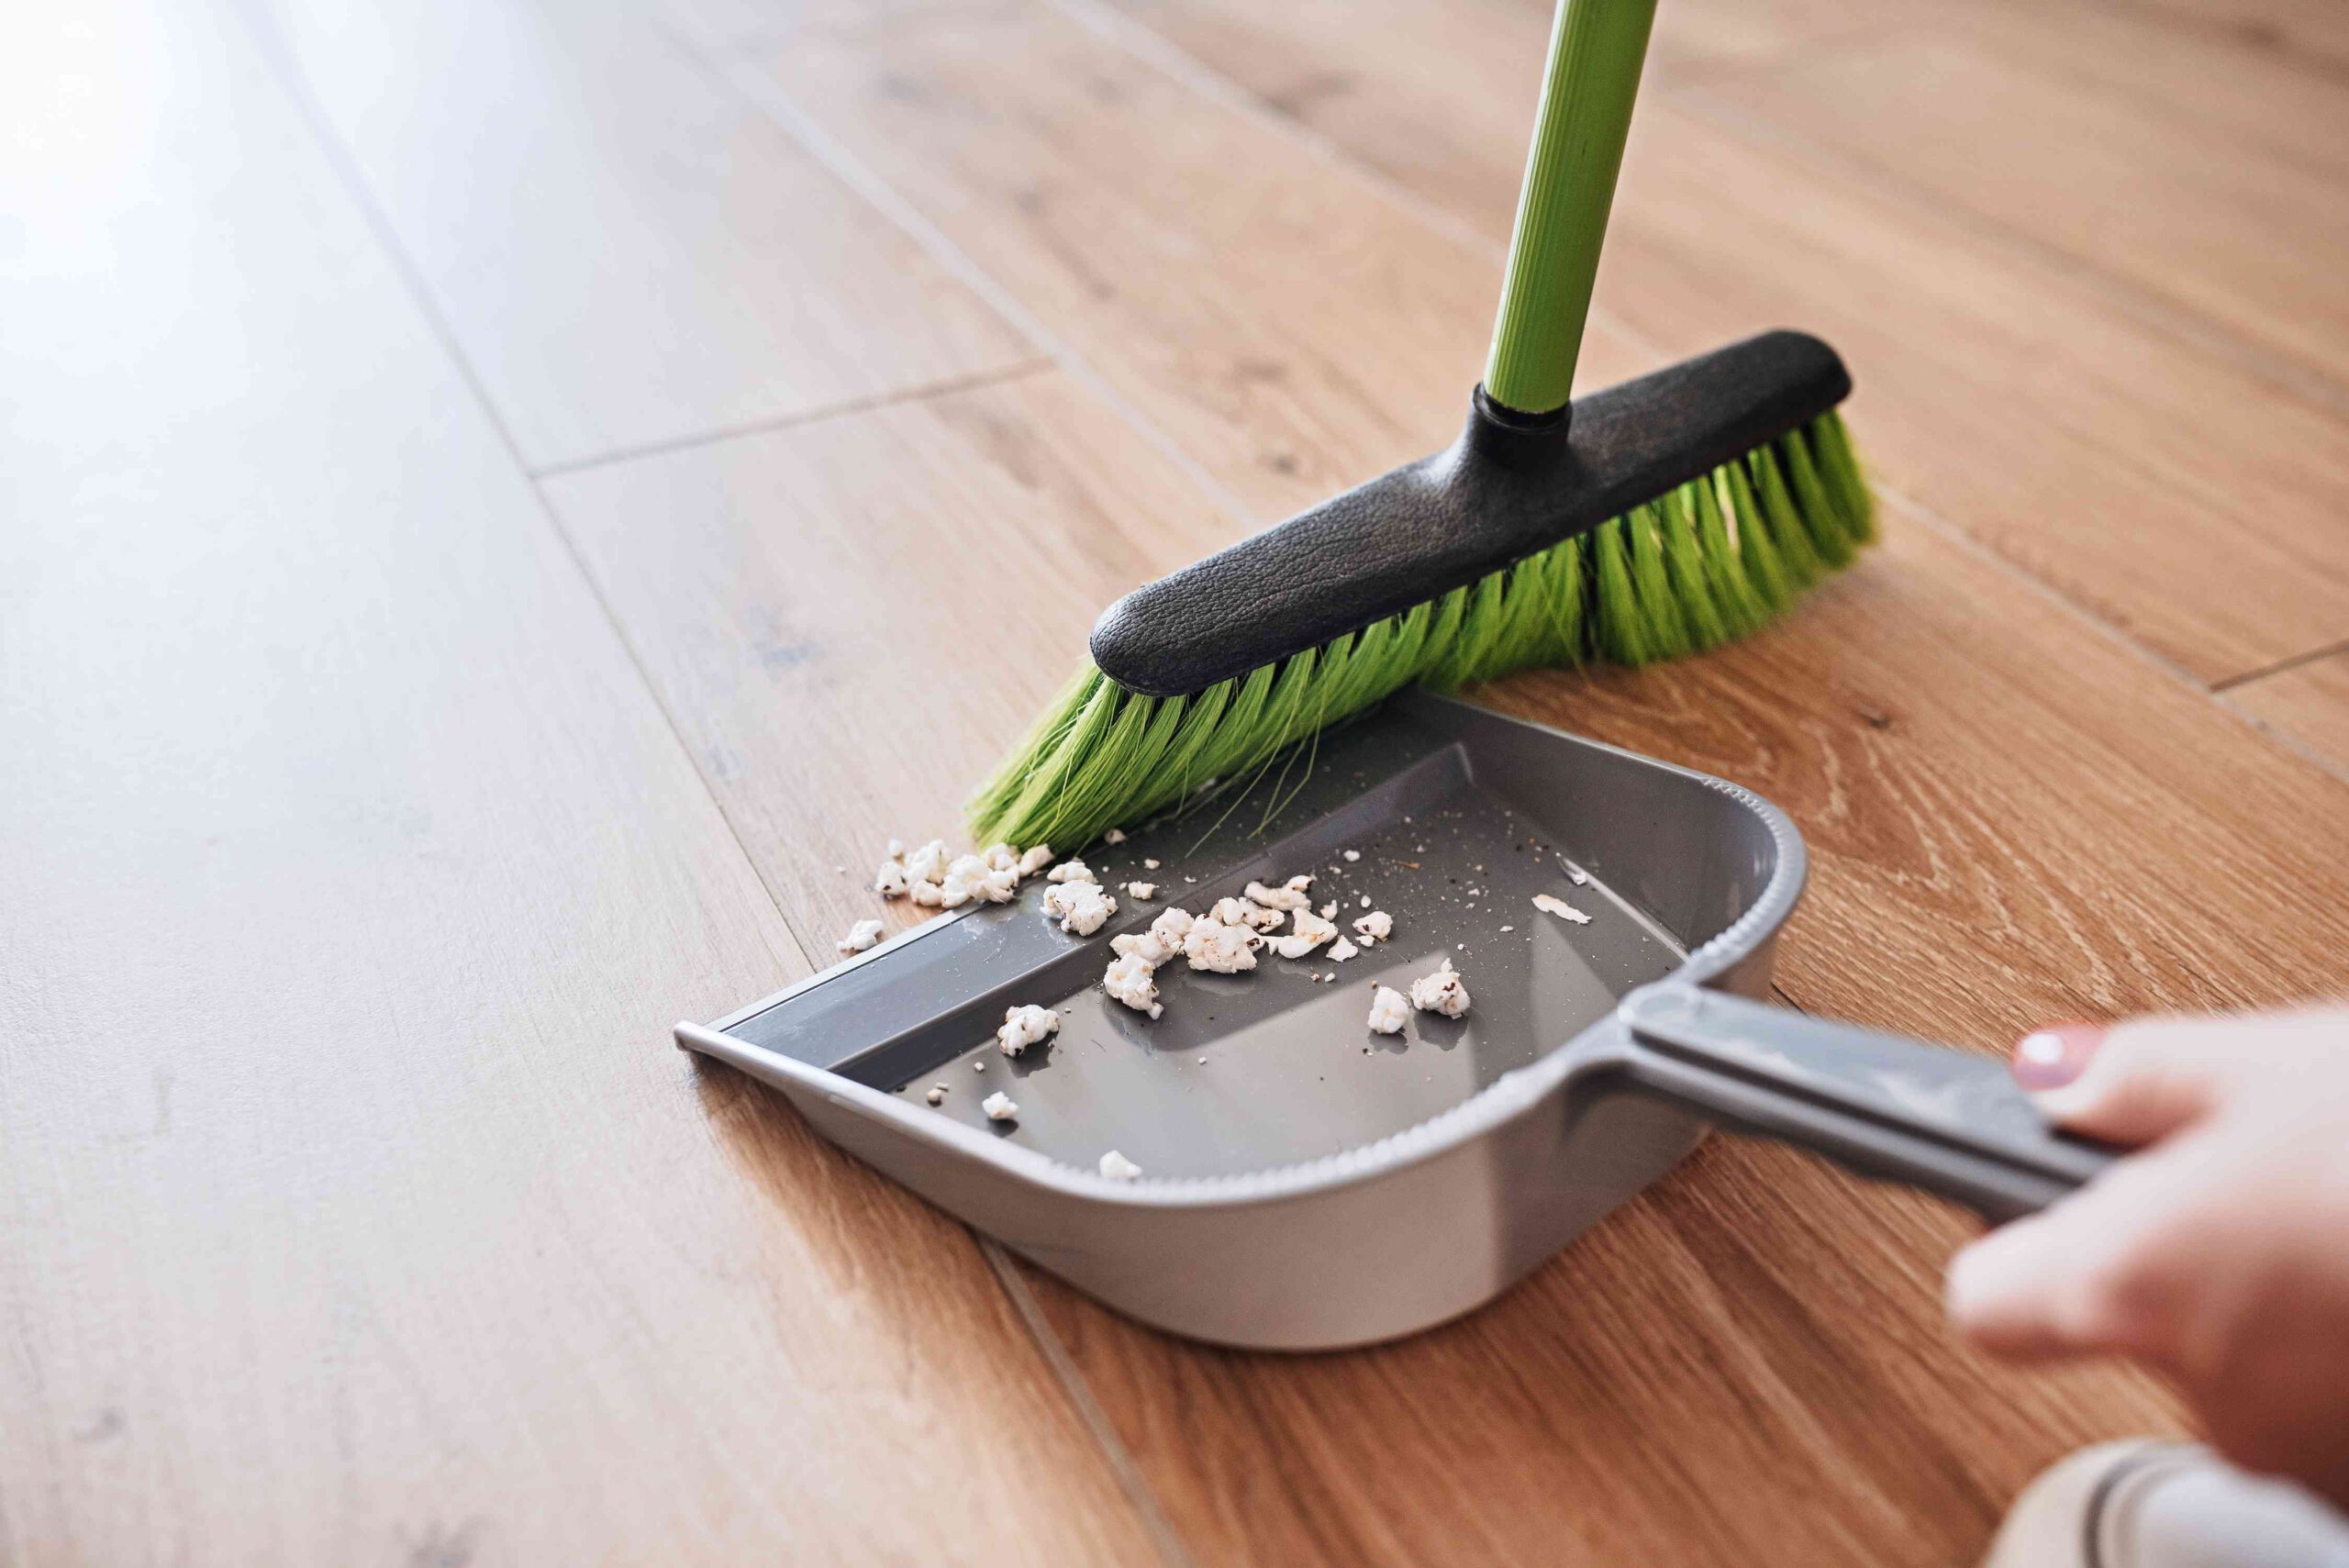 How To Sweep A Floor